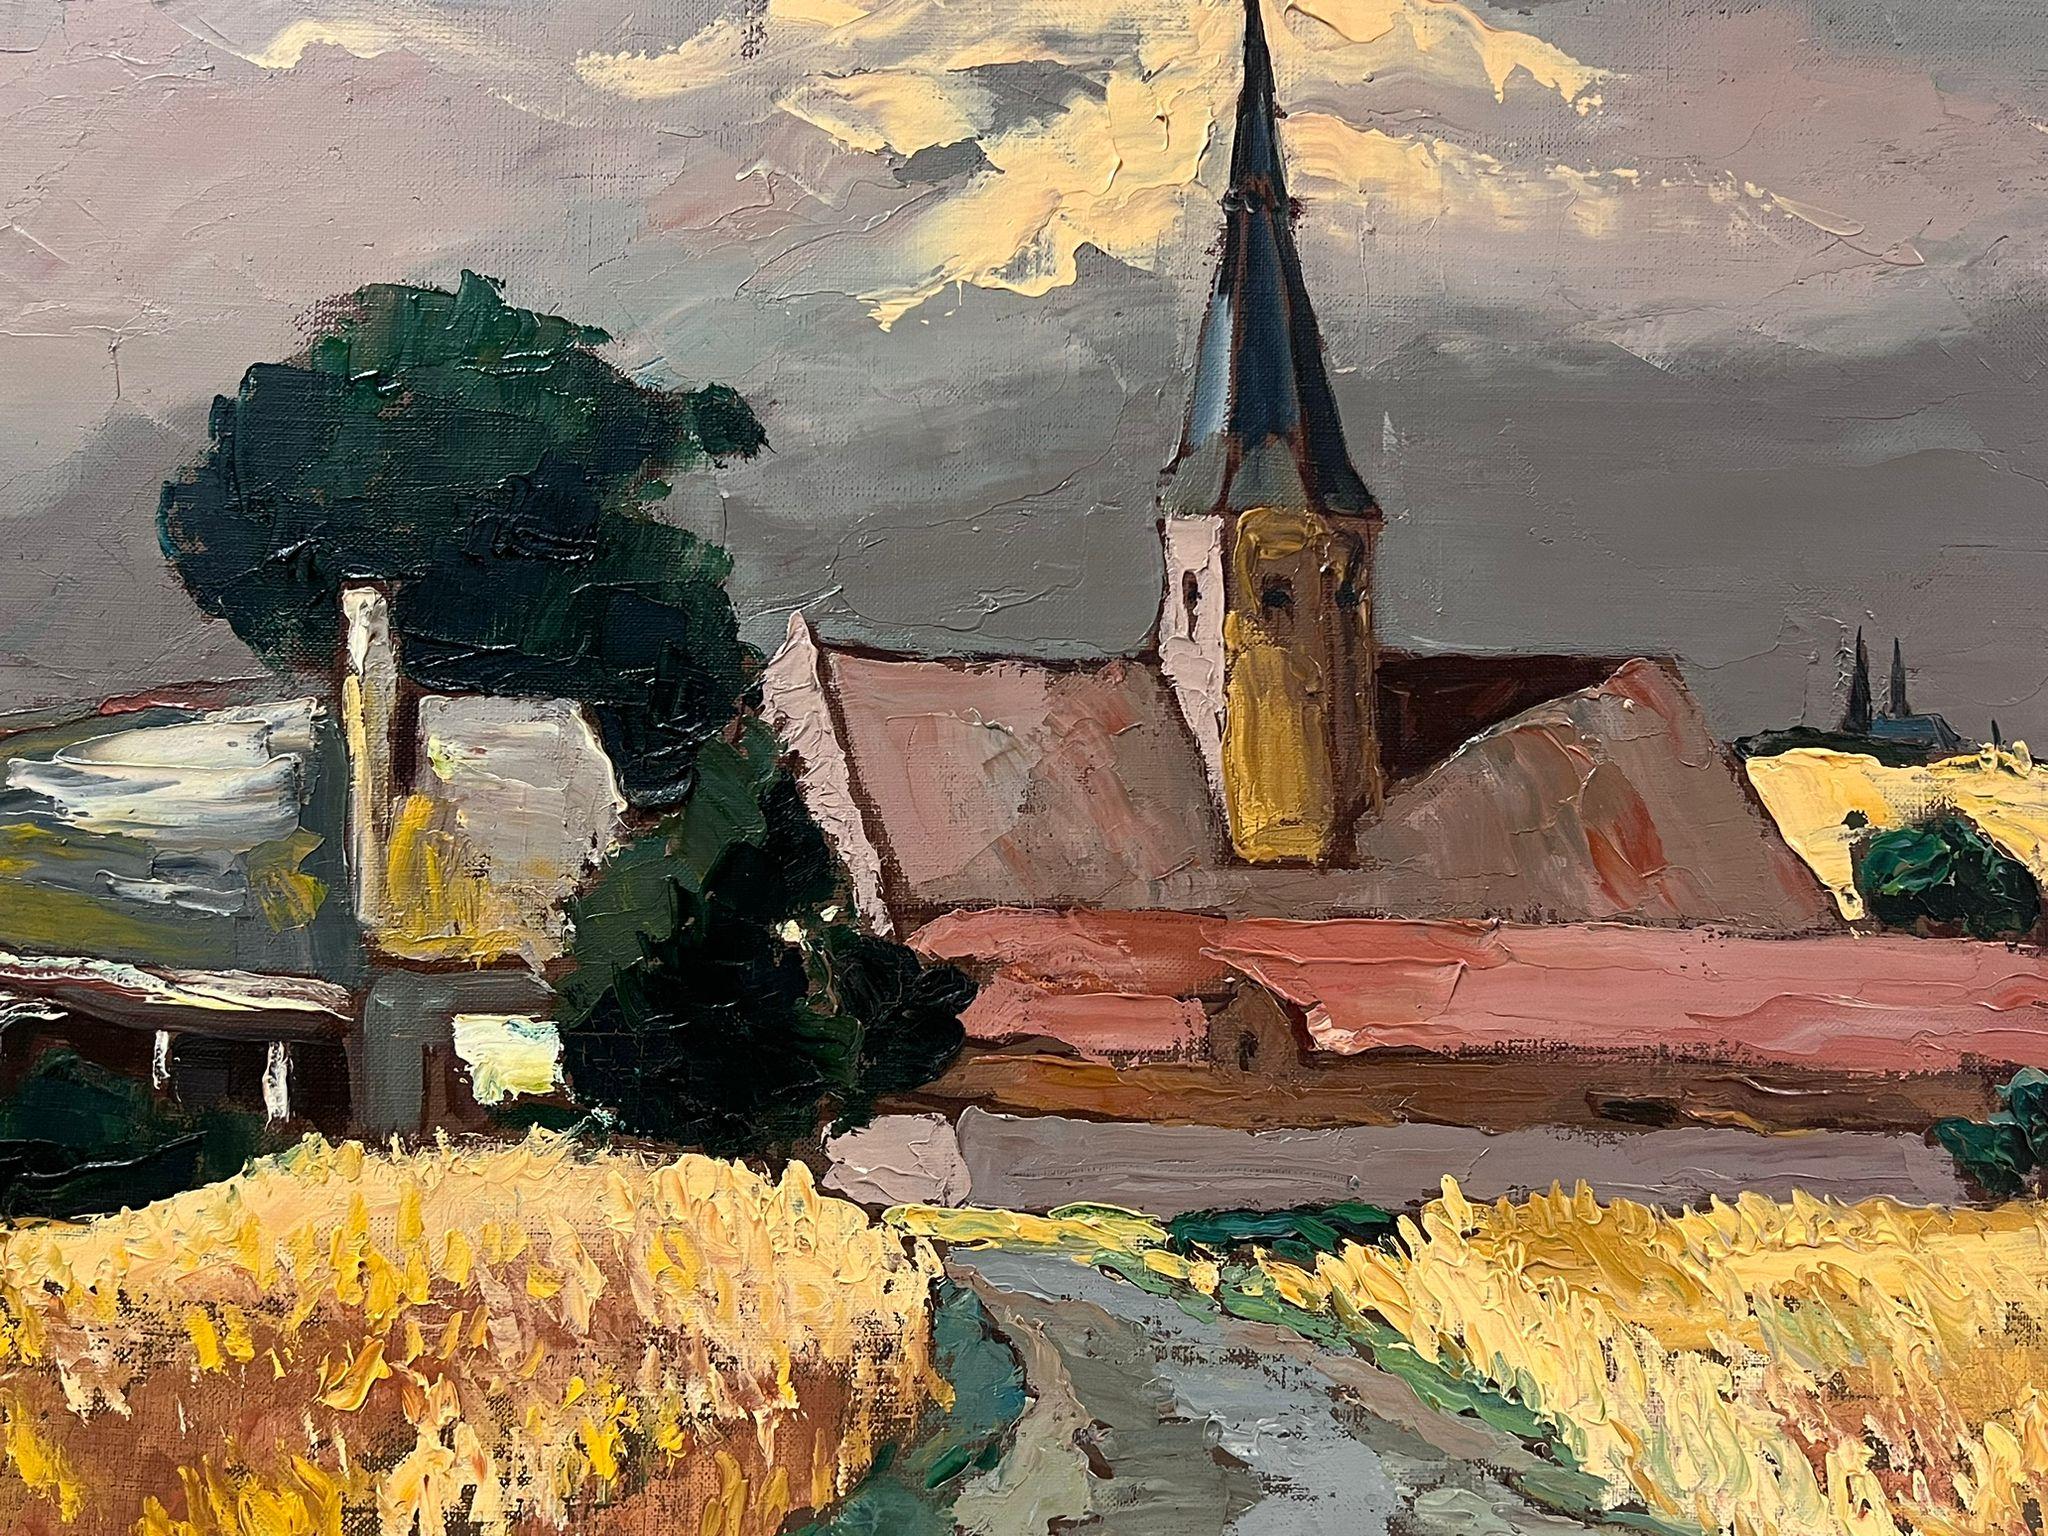 French Landscape
signed by Georges Bordonave (French contemporary) 
dated 1967
oil painting on canvas, unframed
unframed: 20 x 24 inches
condition: very good
provenance: from a large private collection of this artists work, western Paris, France. 